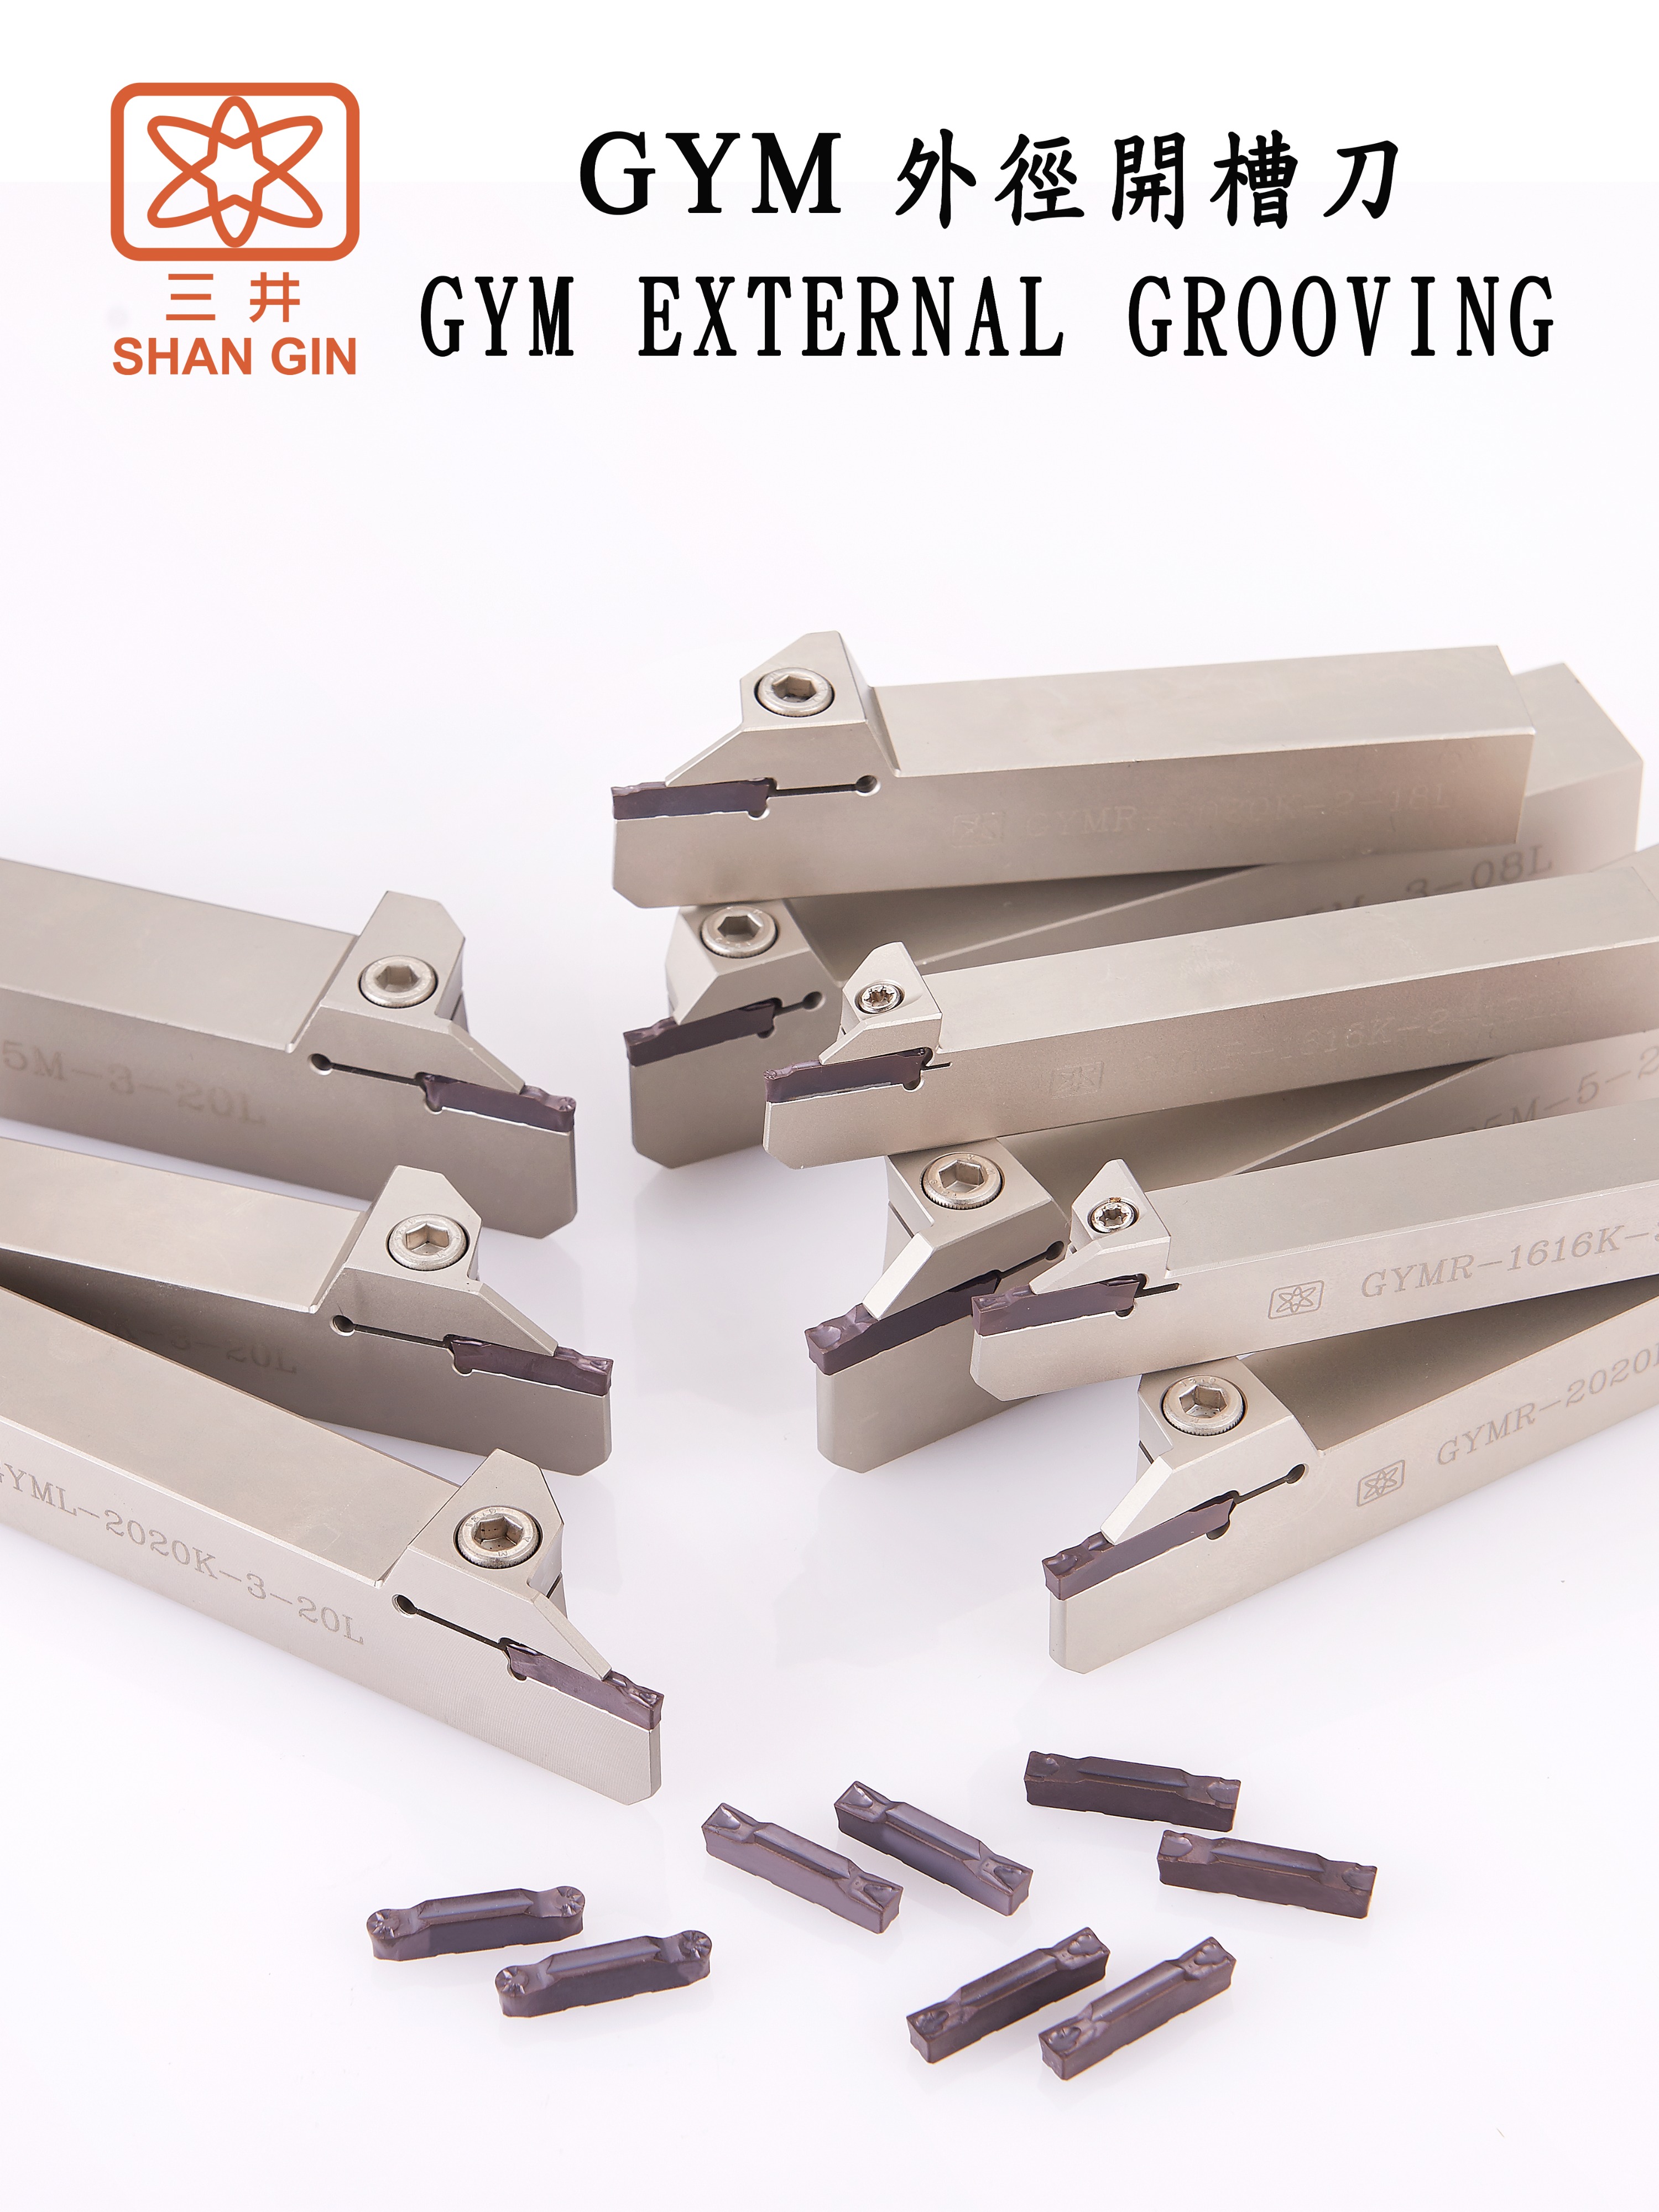 Products|GYM EXTERNAL GROOVING